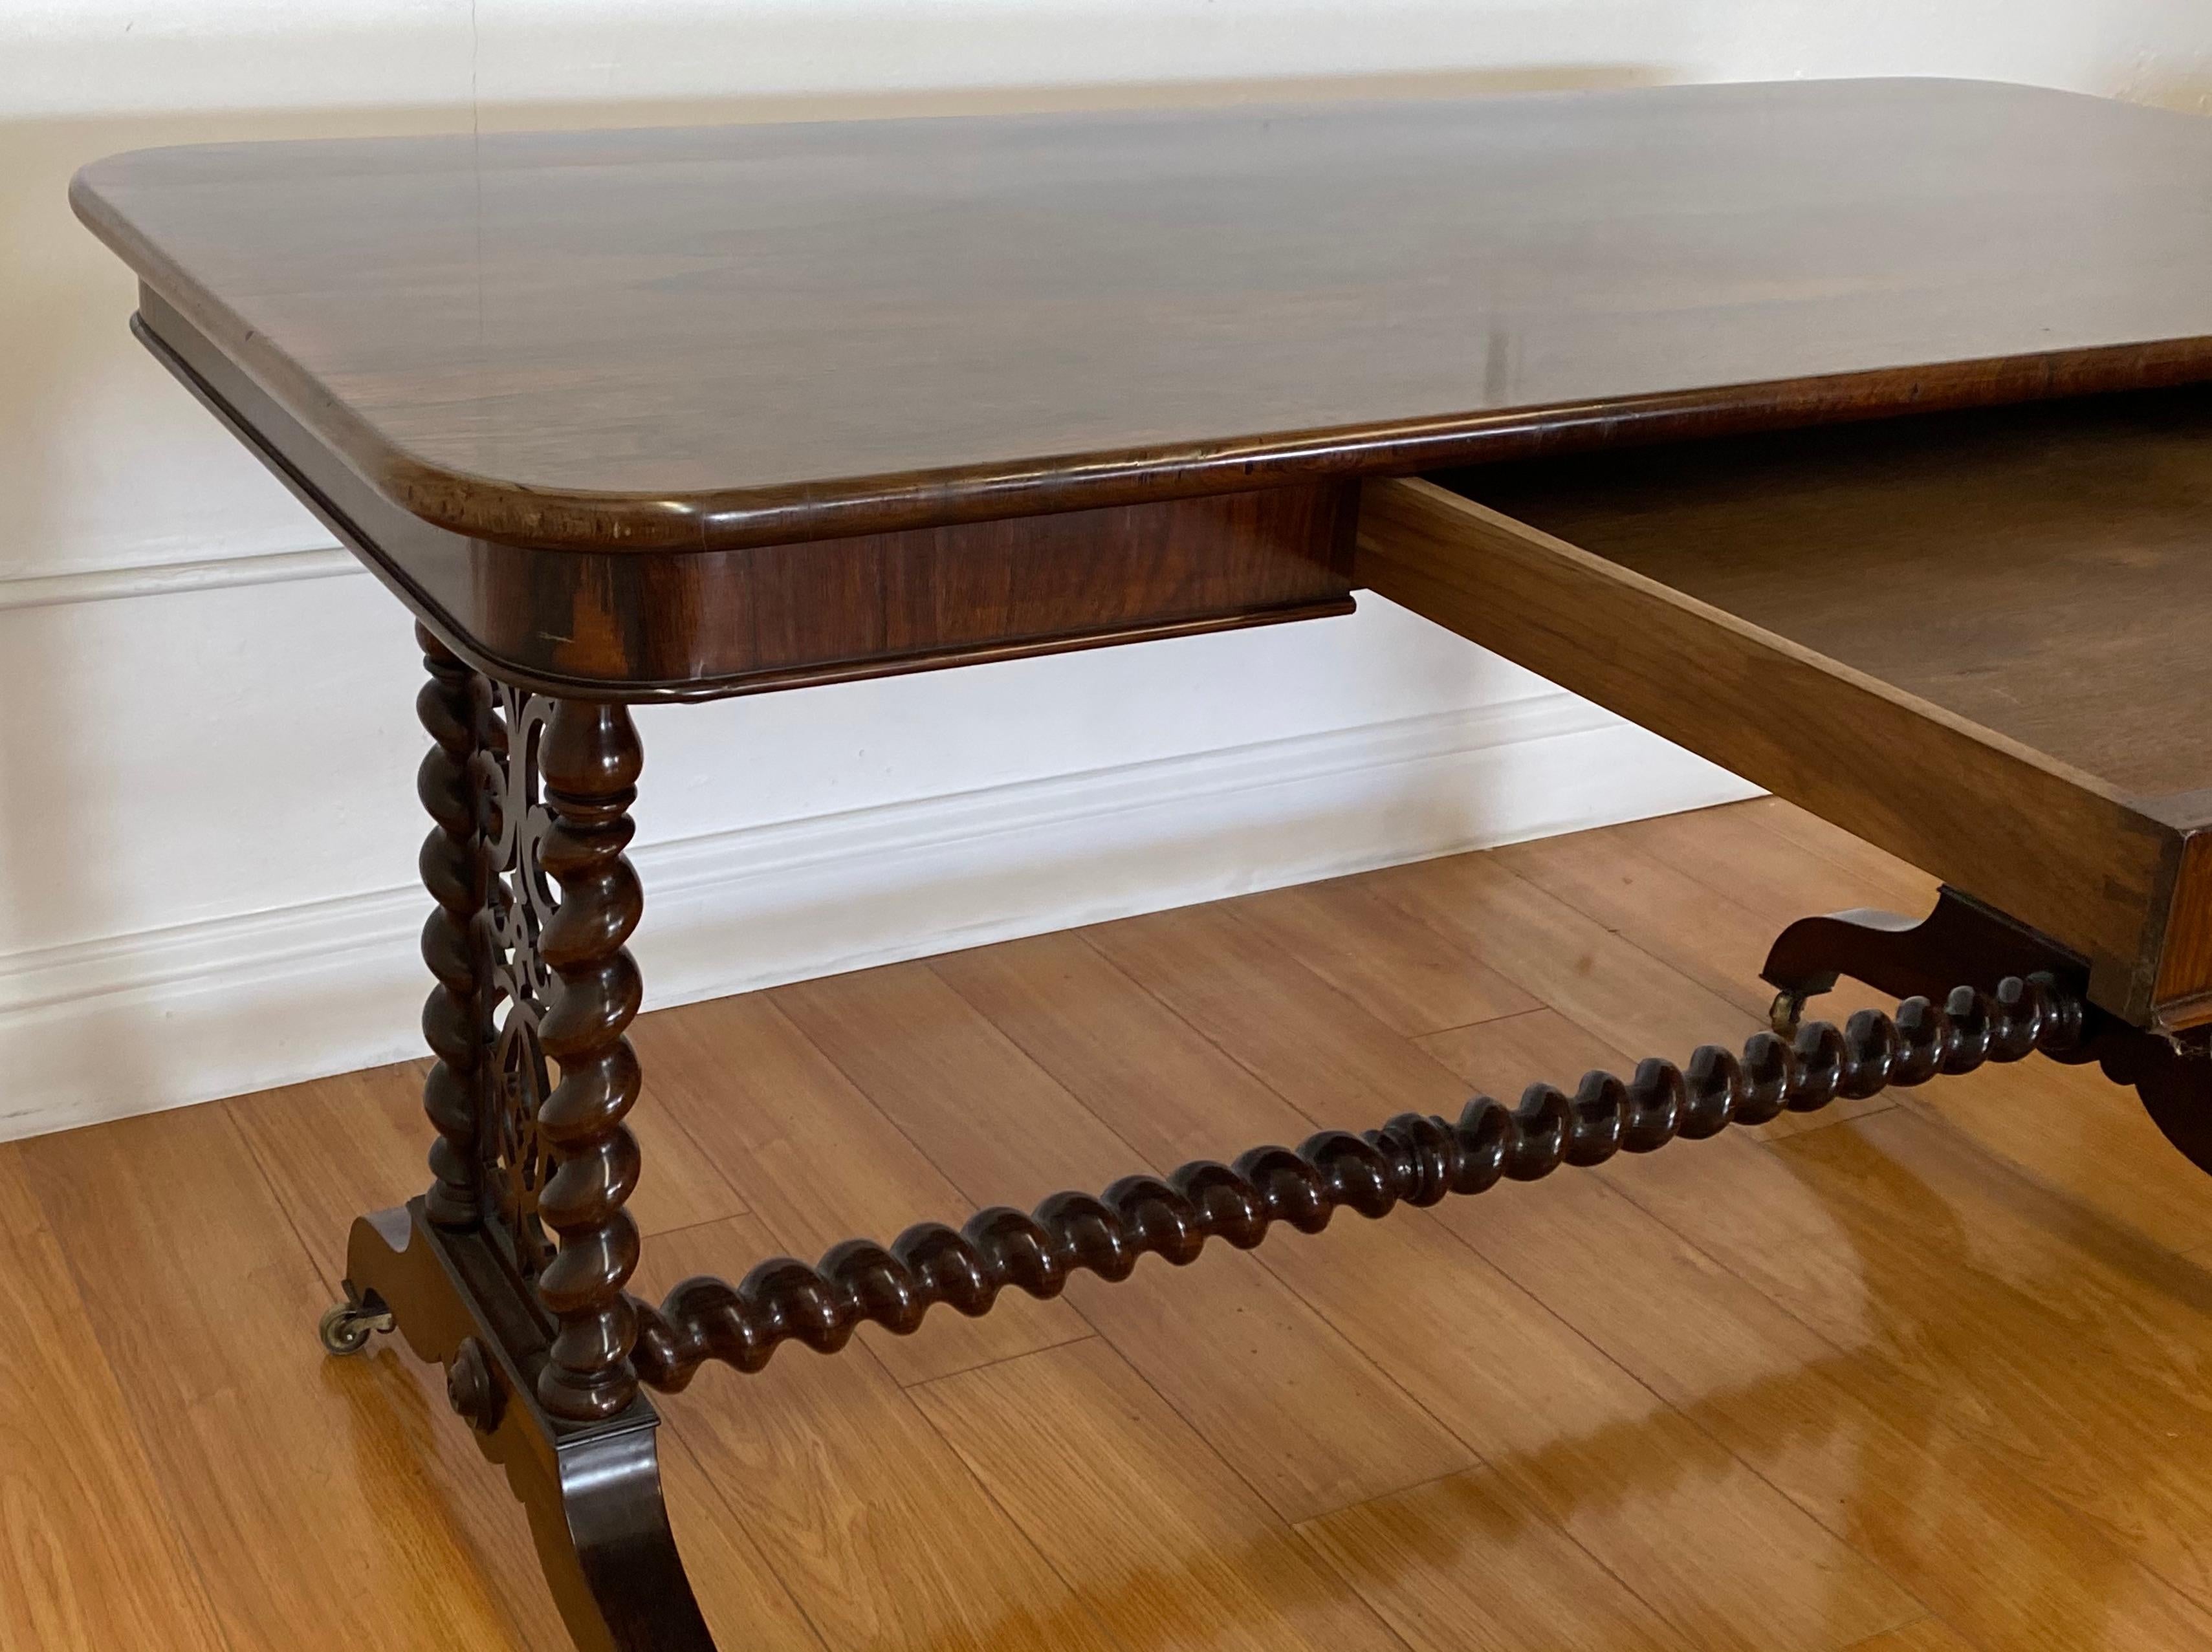 Hand-Carved 19th Century Hand Carved Rosewood Desk W/Barley Twist Legs & Trestle Base